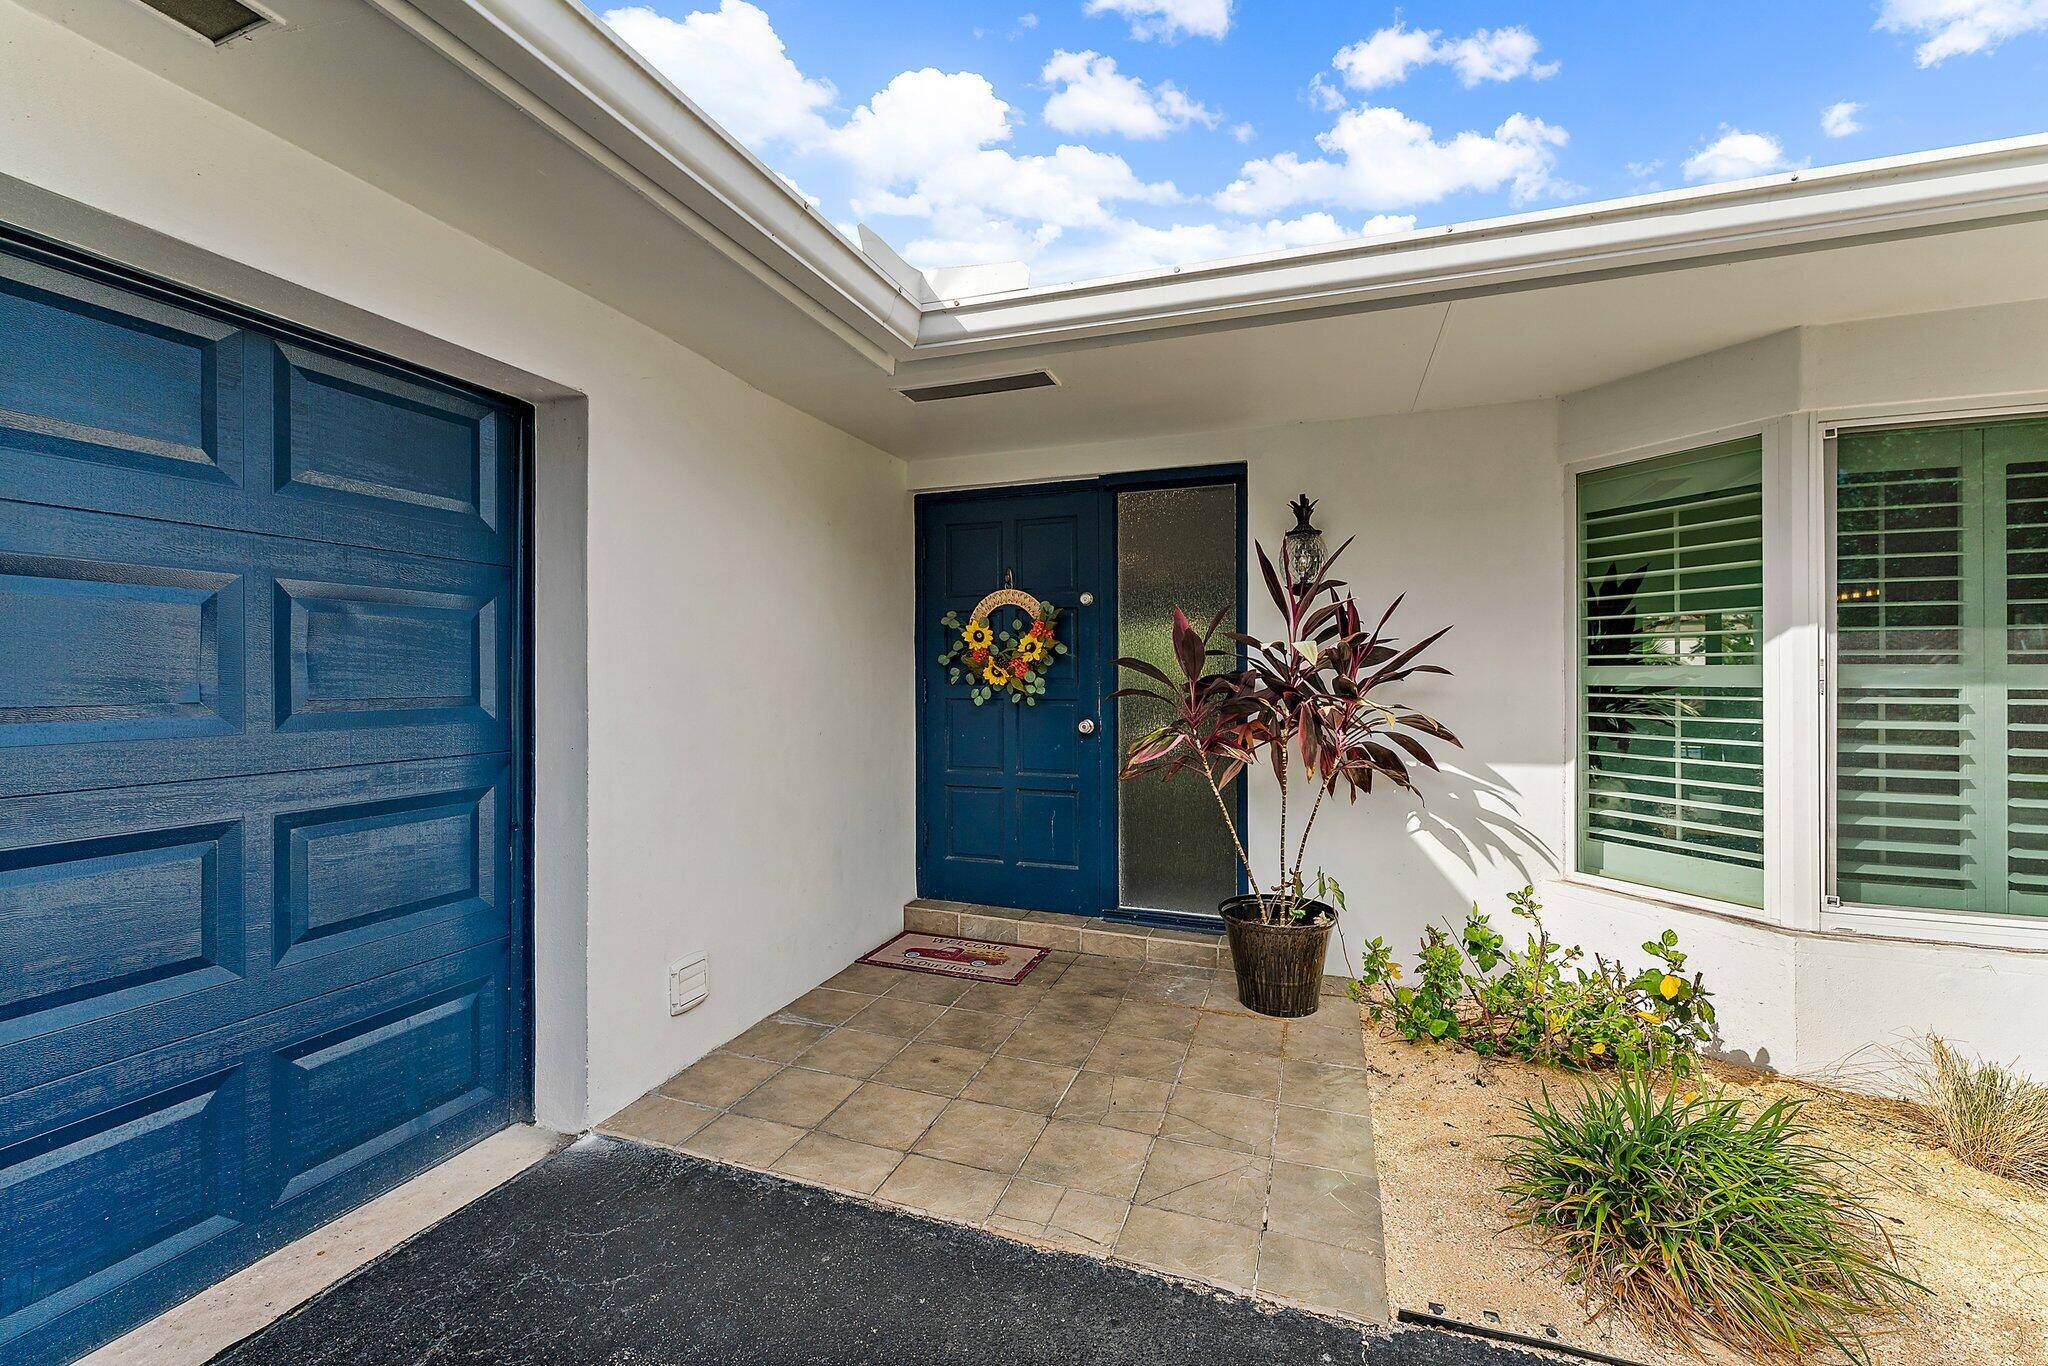 If you've been looking for an extraordinary home in Tequesta, look no more.